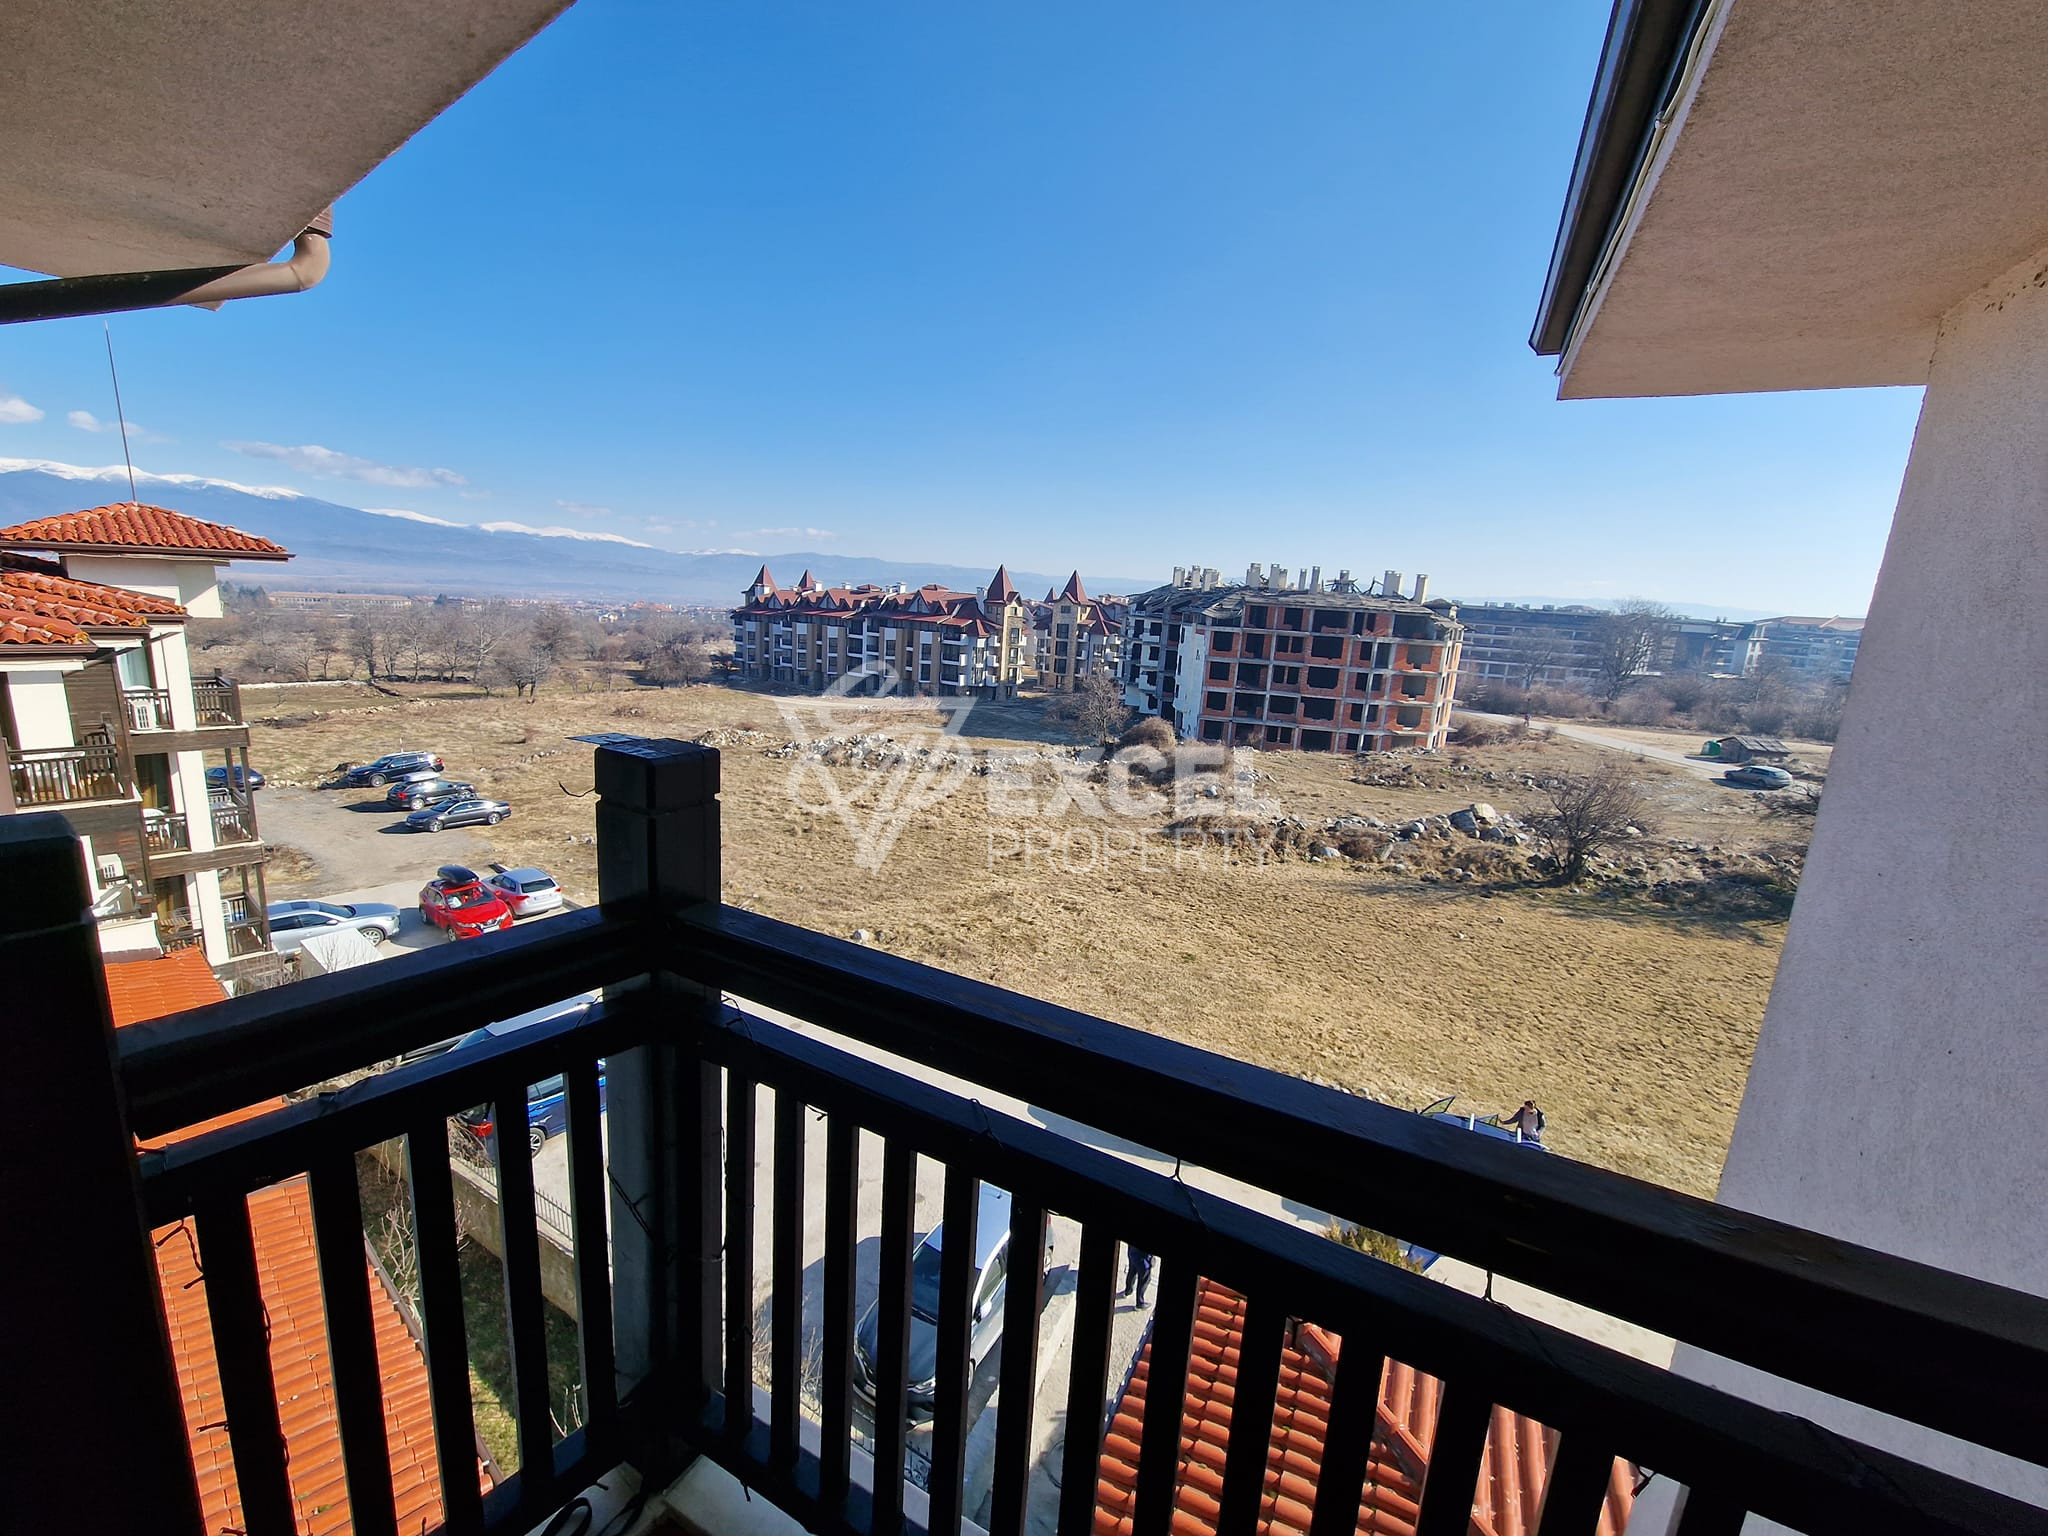 One bedroom apartment in St George Ski and Holiday for sale in Bansko